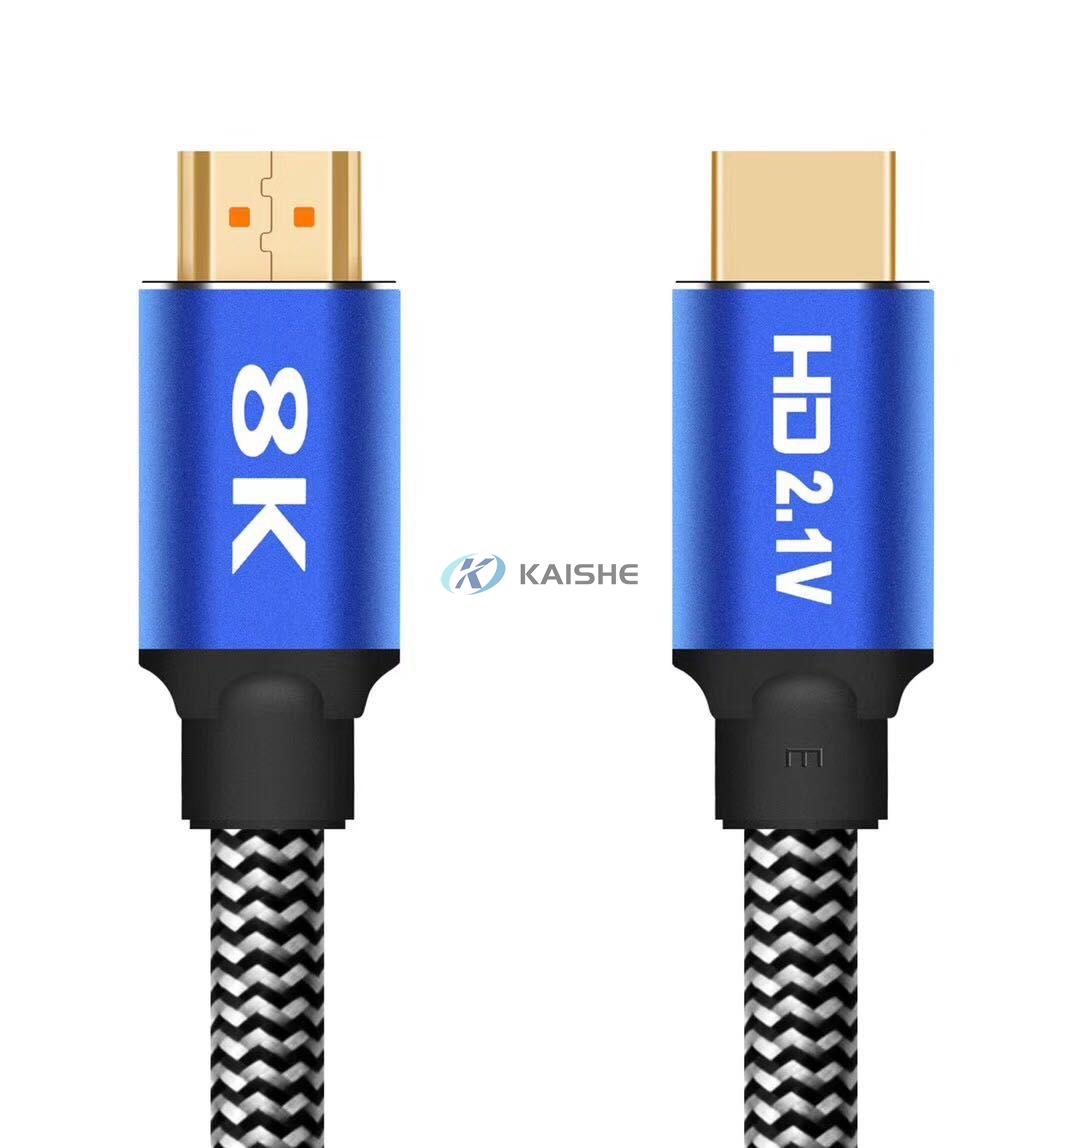 8K HDMI Ultra HD High Speed 48Gbps Cable